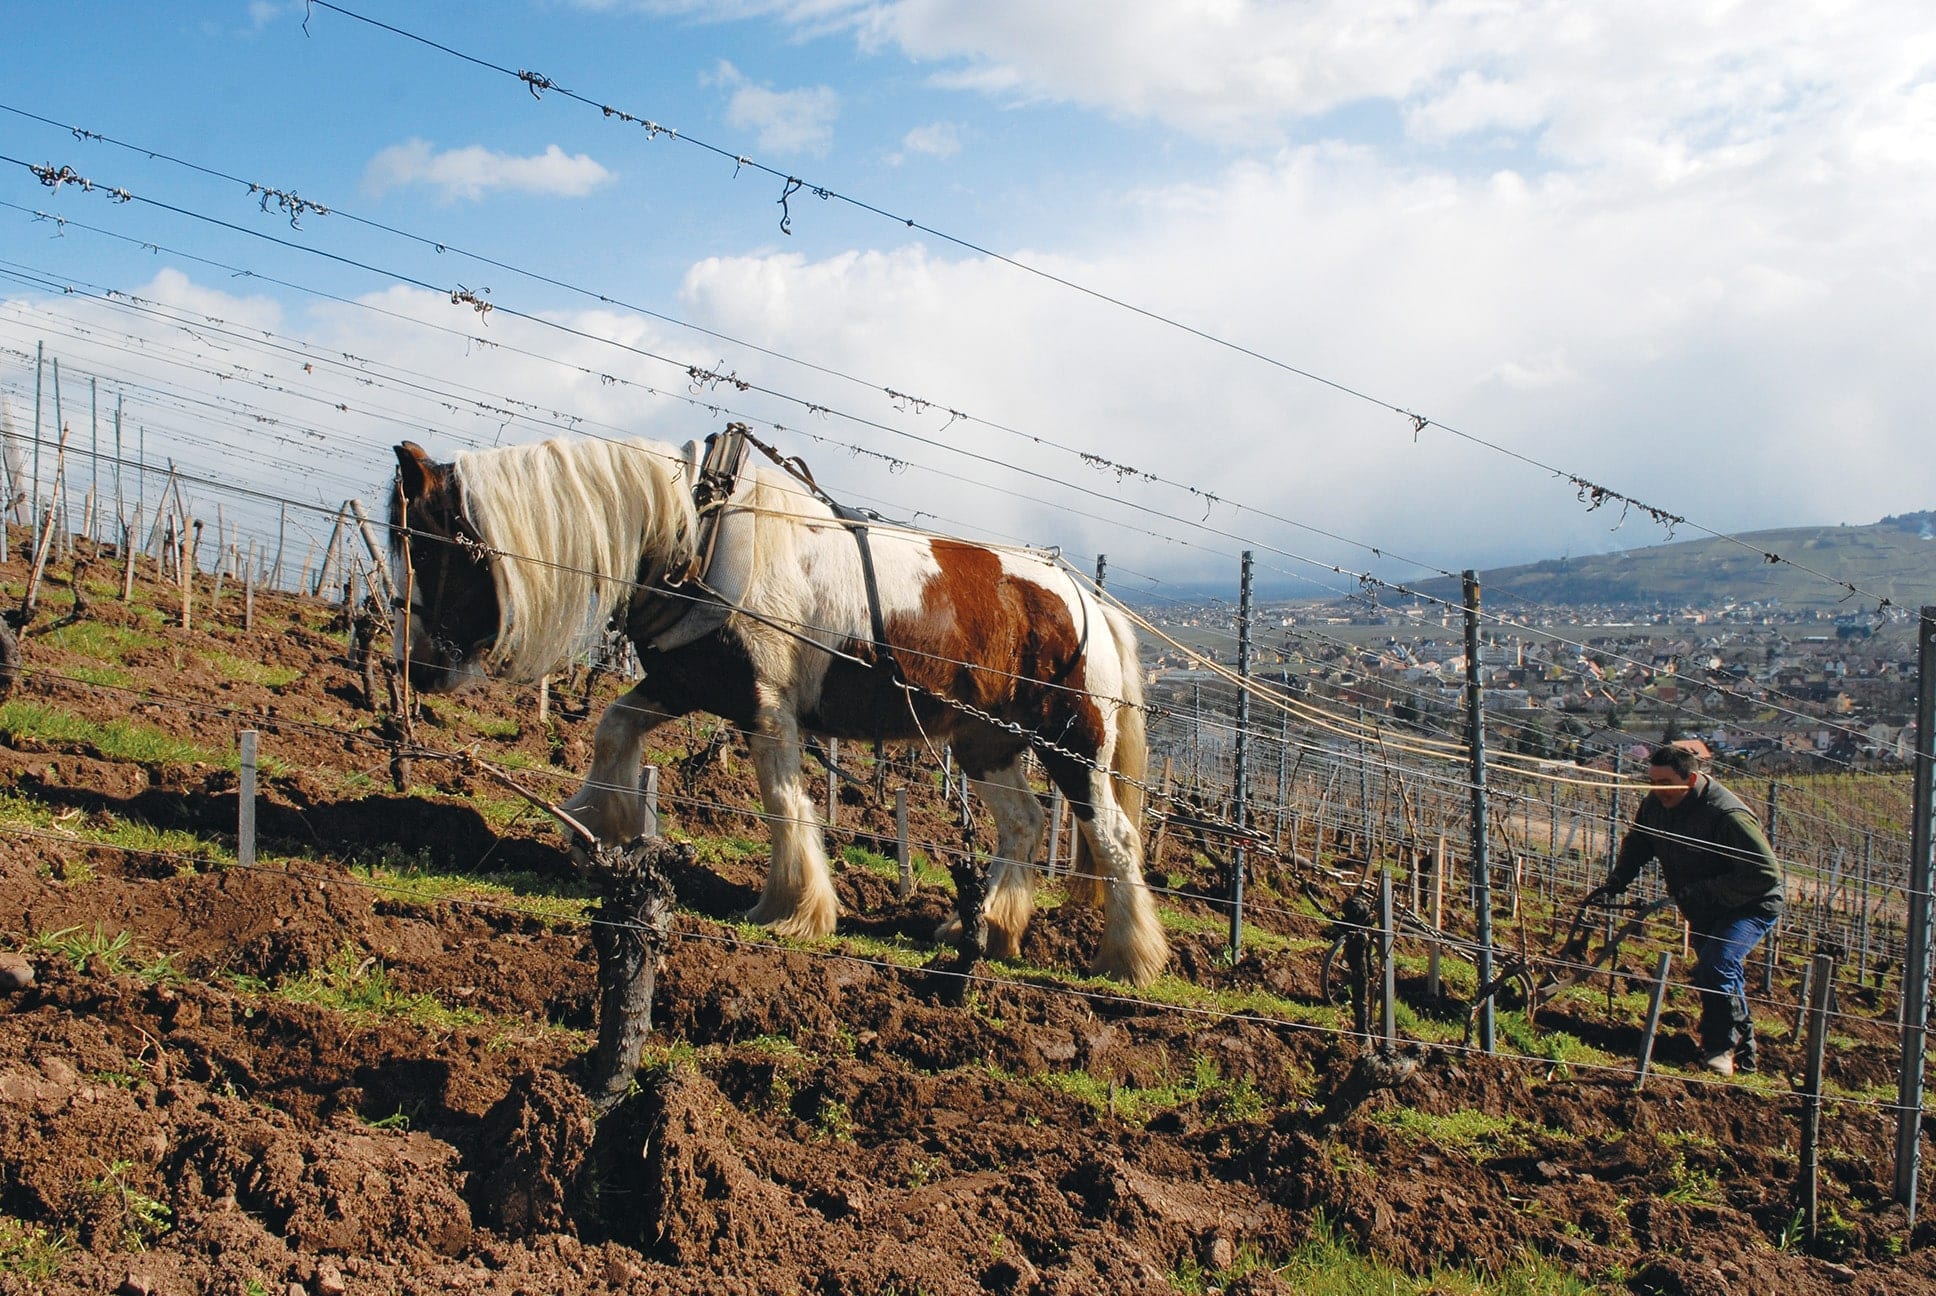 Plowing with a Horse at Domaine Zind-Humbrecht